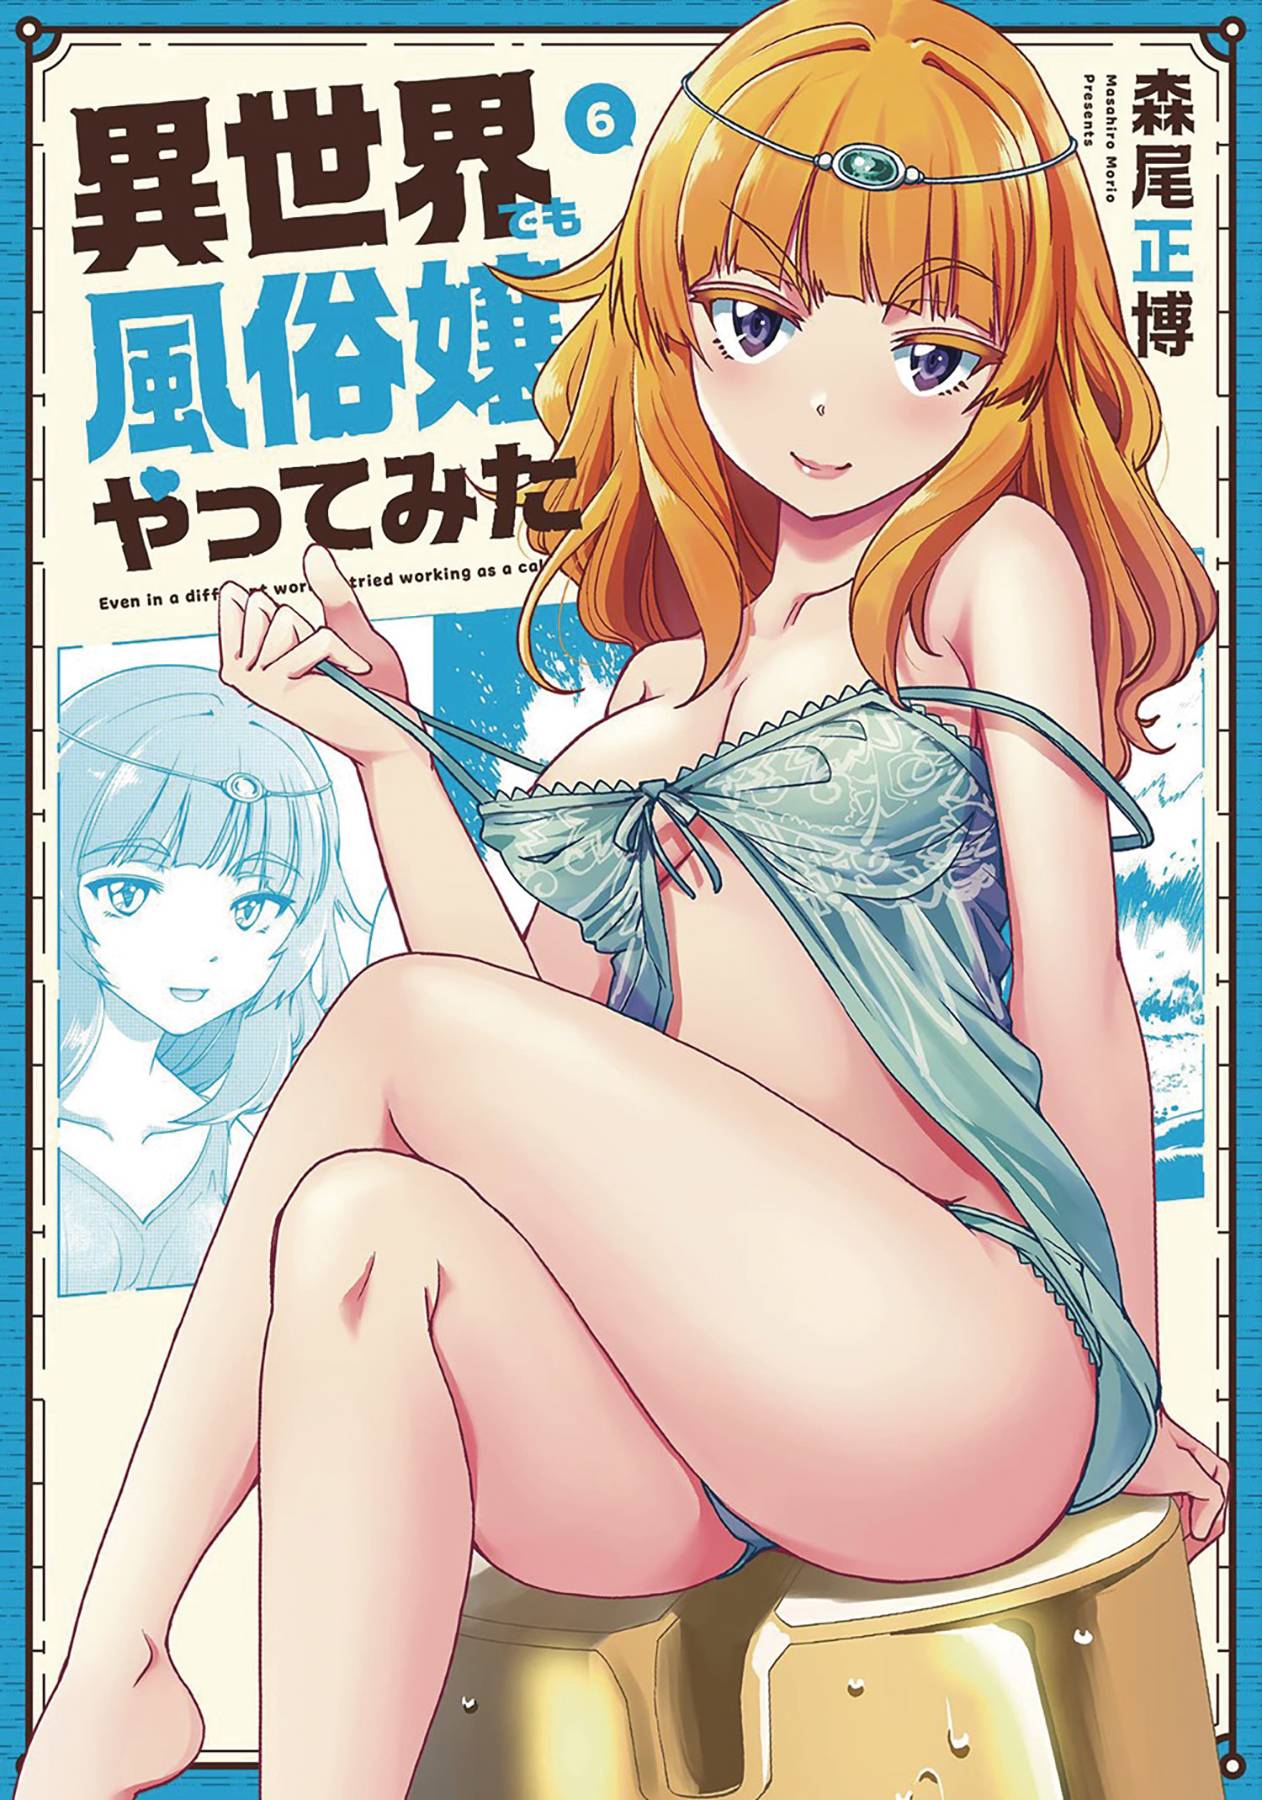 Manga: Call Girl in Another World Vol 6 (18+)